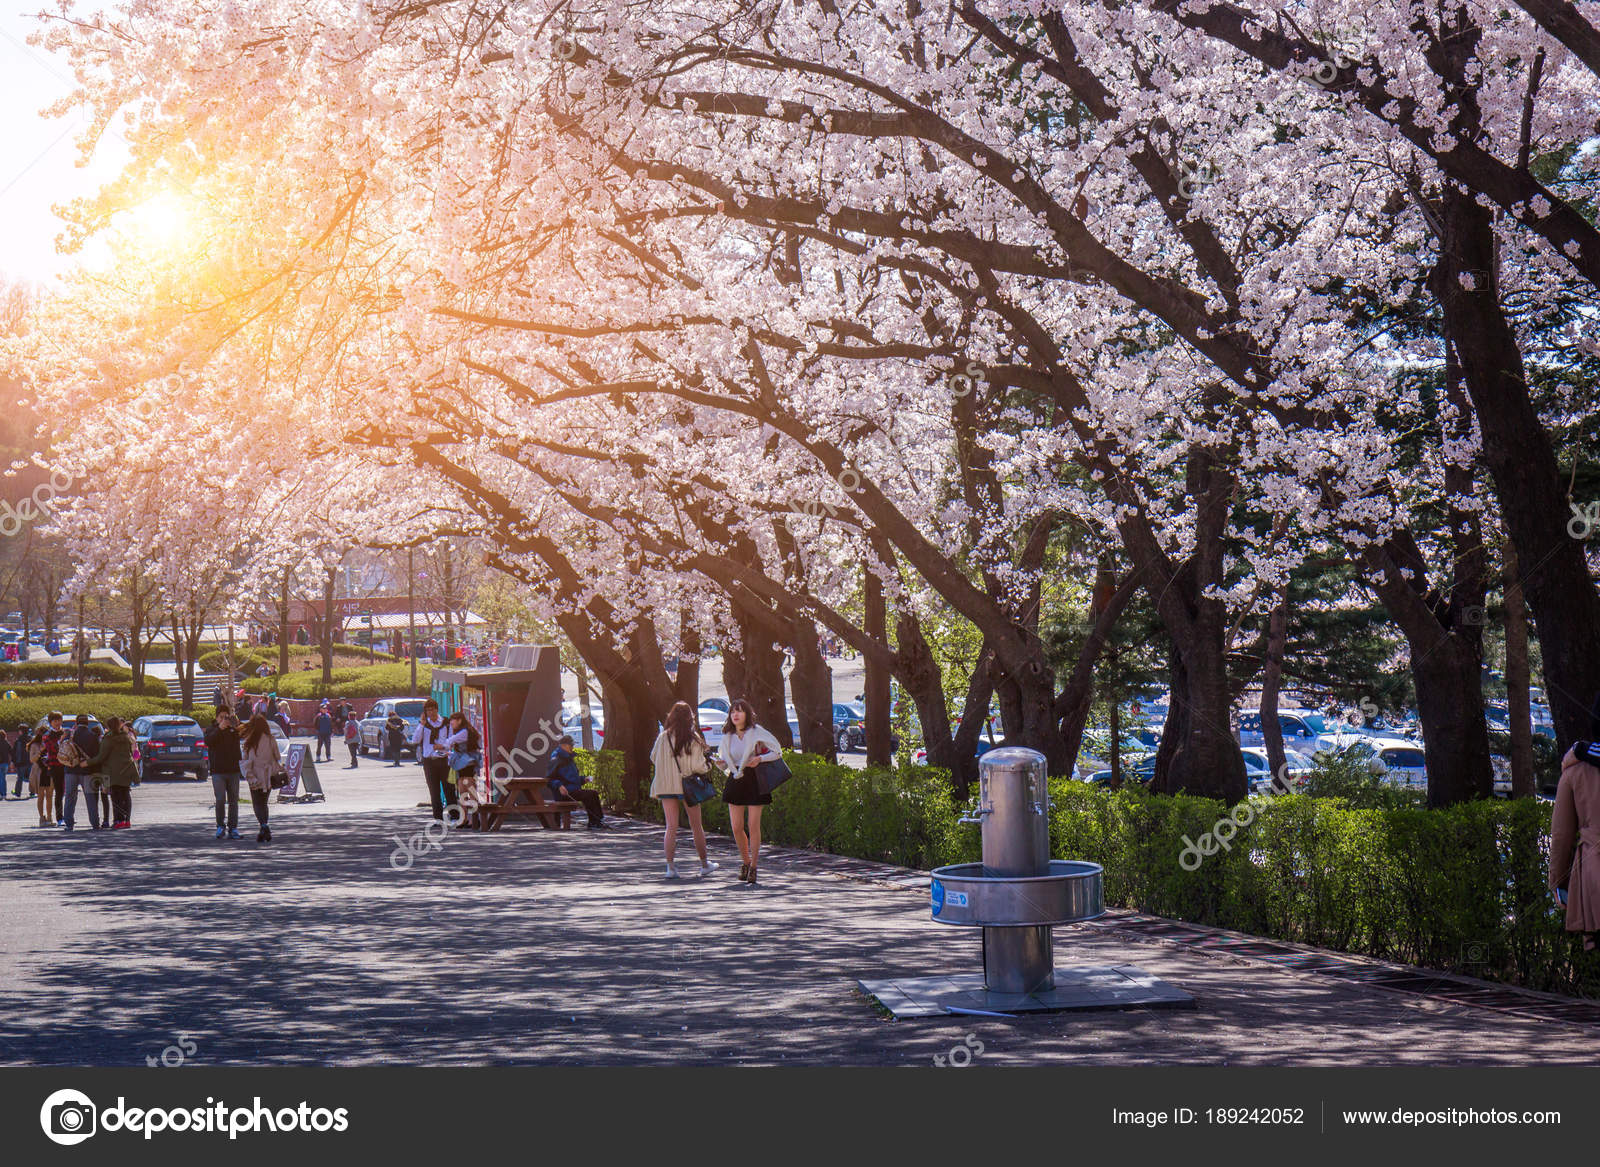 Cherry Blossom Festival In Spring In Seoul Grand Park South Korea Stock Editorial Photo C Boy Panyar Gmail Com 189242052,Kitchenaid Dishwasher Filter Water In Bottom